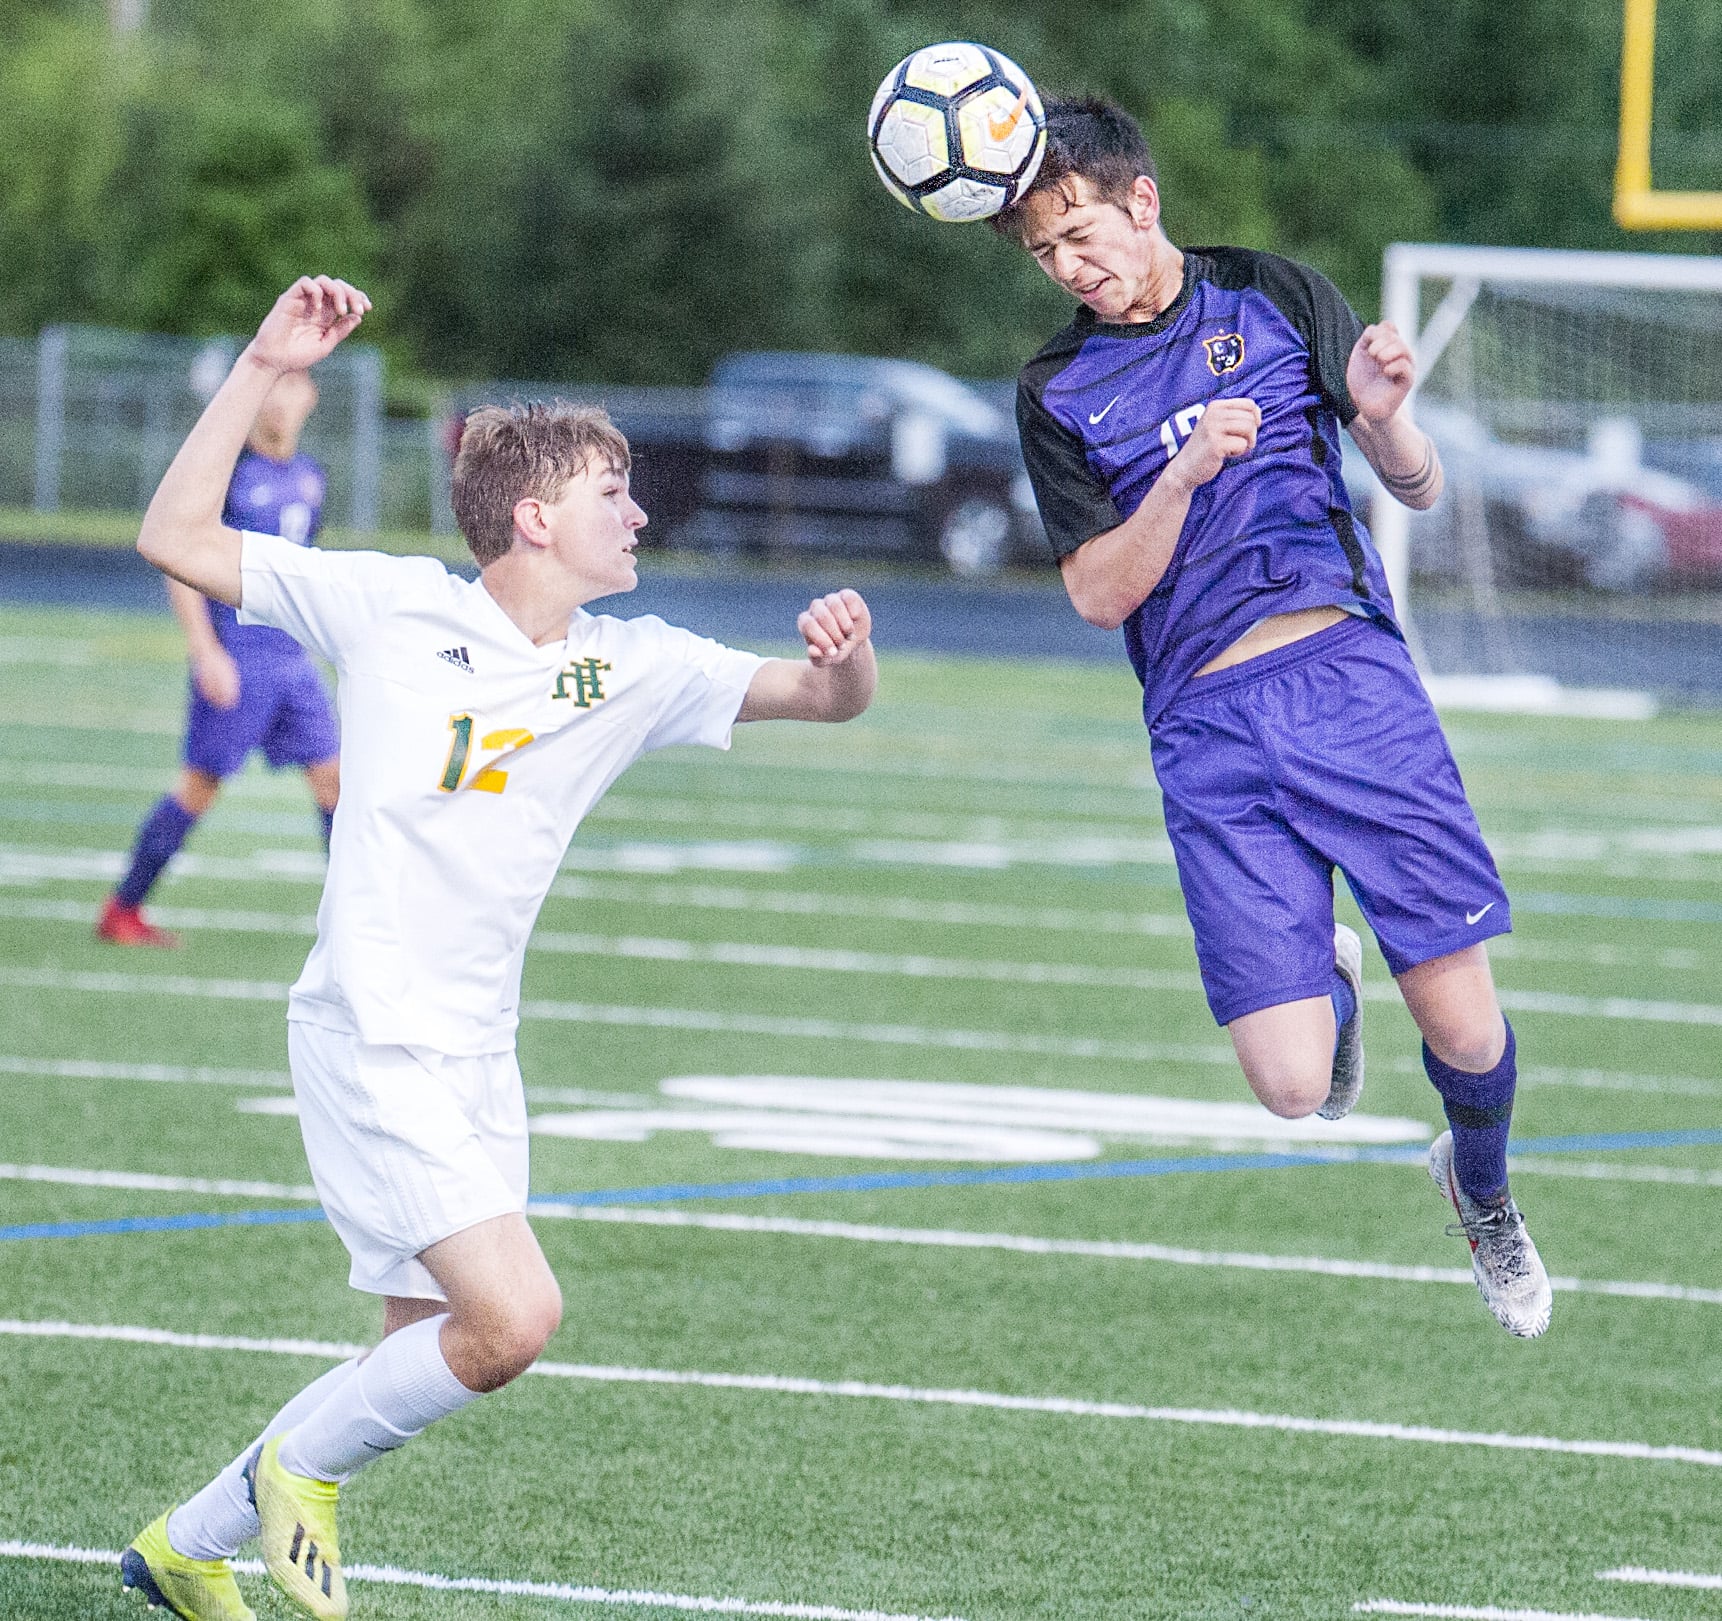 Columbia River's Alex Wiser heads the ball over Foss' Peter McKown in a 2A State first round game on Tuesday at Chieftain Stadium. Columbia River won 3-1.